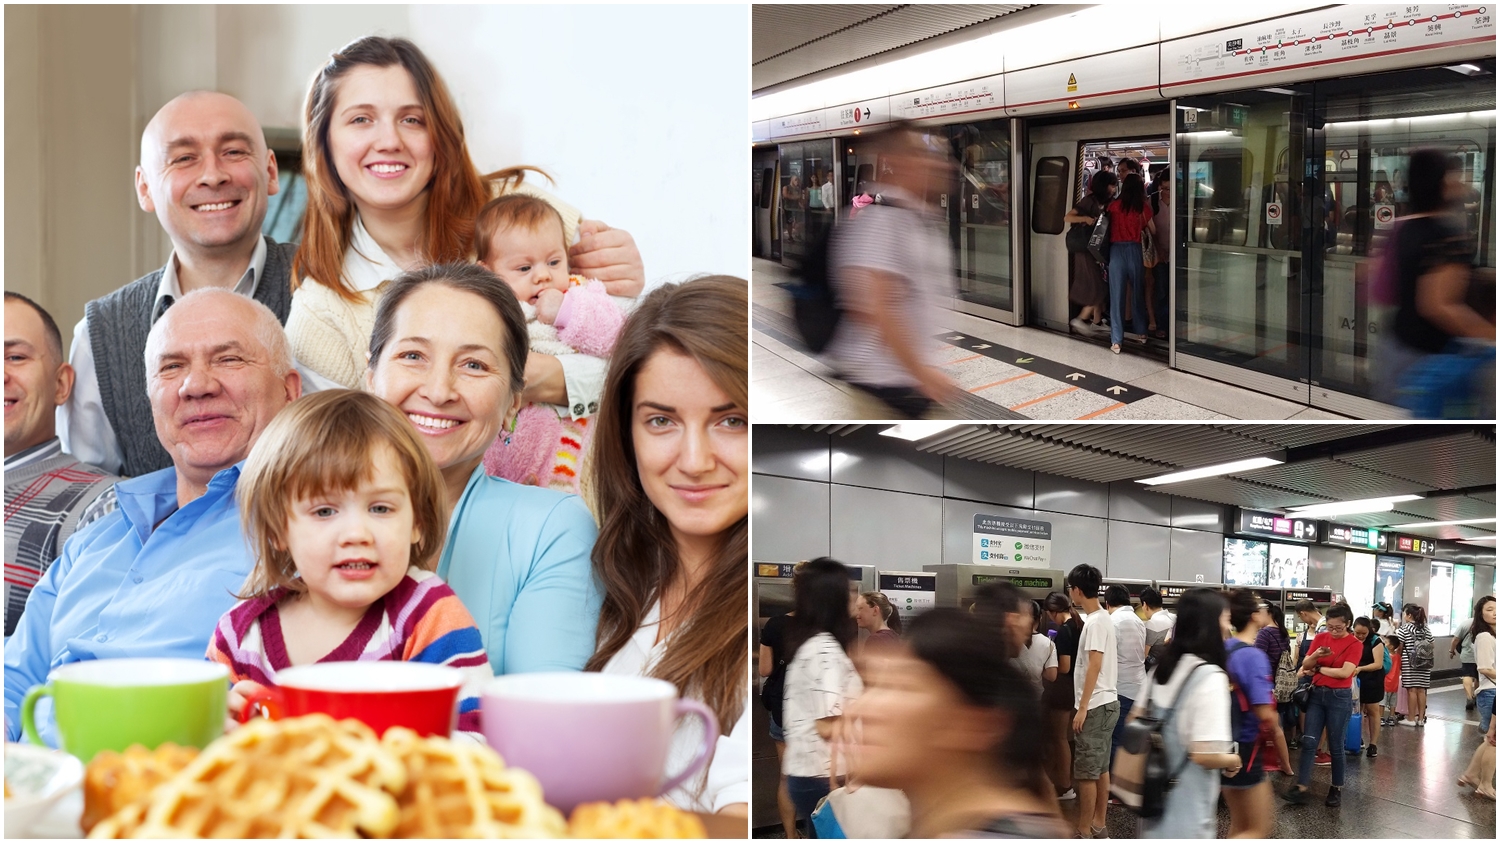 Apart from relying on MTR to go sightseeing, big families visiting Hong Kong have better choices.